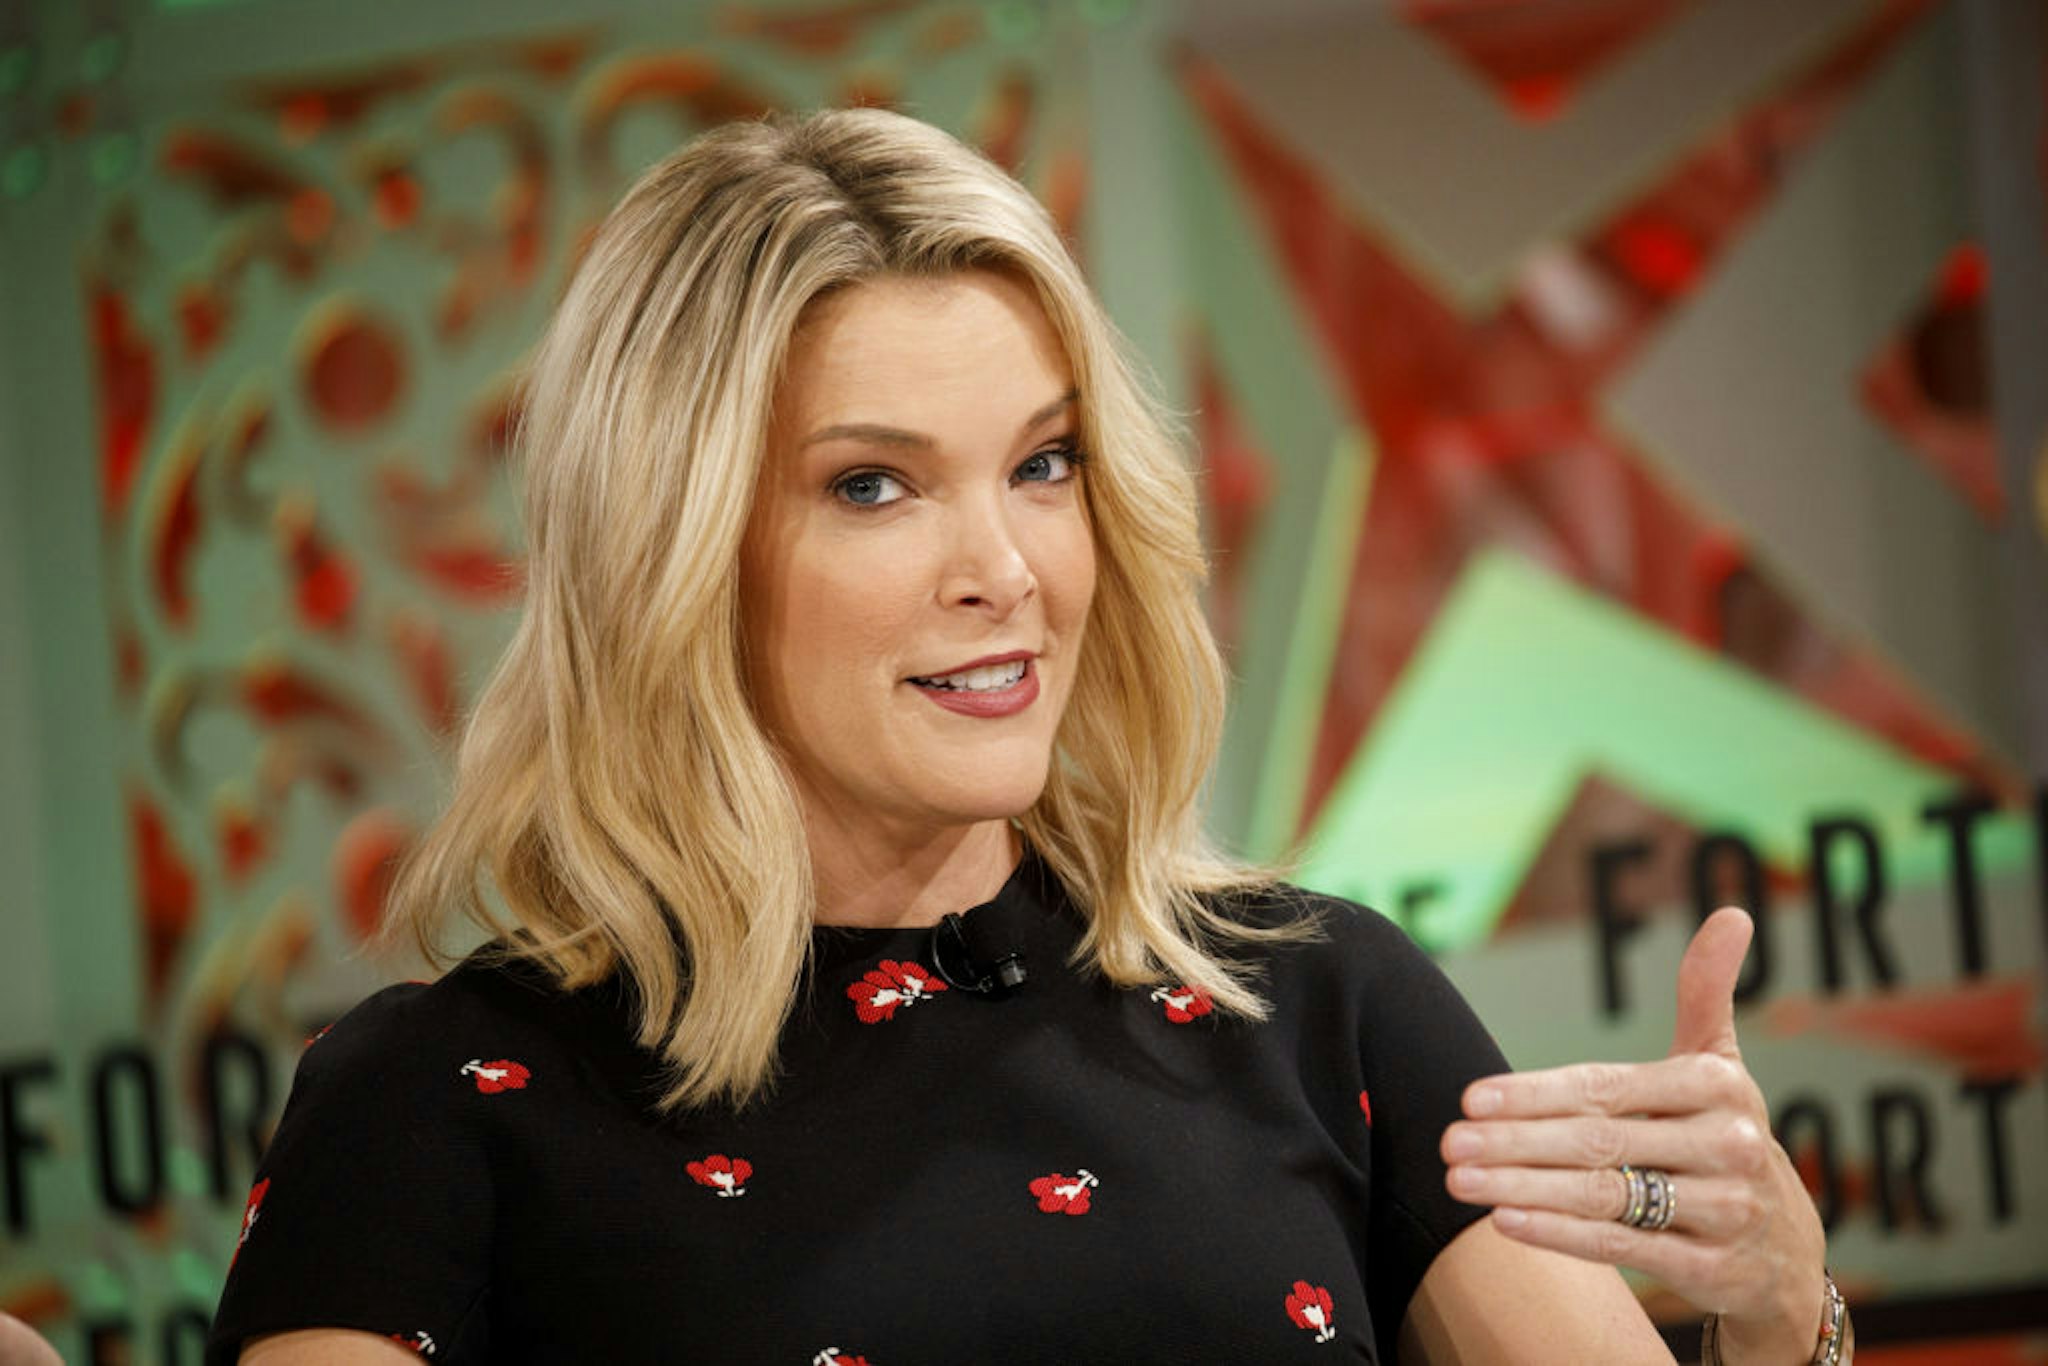 Journalist Megyn Kelly speaks during the Fortune's Most Powerful Women conference in Dana Point, California, U.S., on Tuesday, October 2, 2018. The conference brings together leading women in business, government, philanthropy, education and the arts for conversations to inspire and deliver advice. Photographer: Patrick T. Fallon/Bloomberg via Getty Images